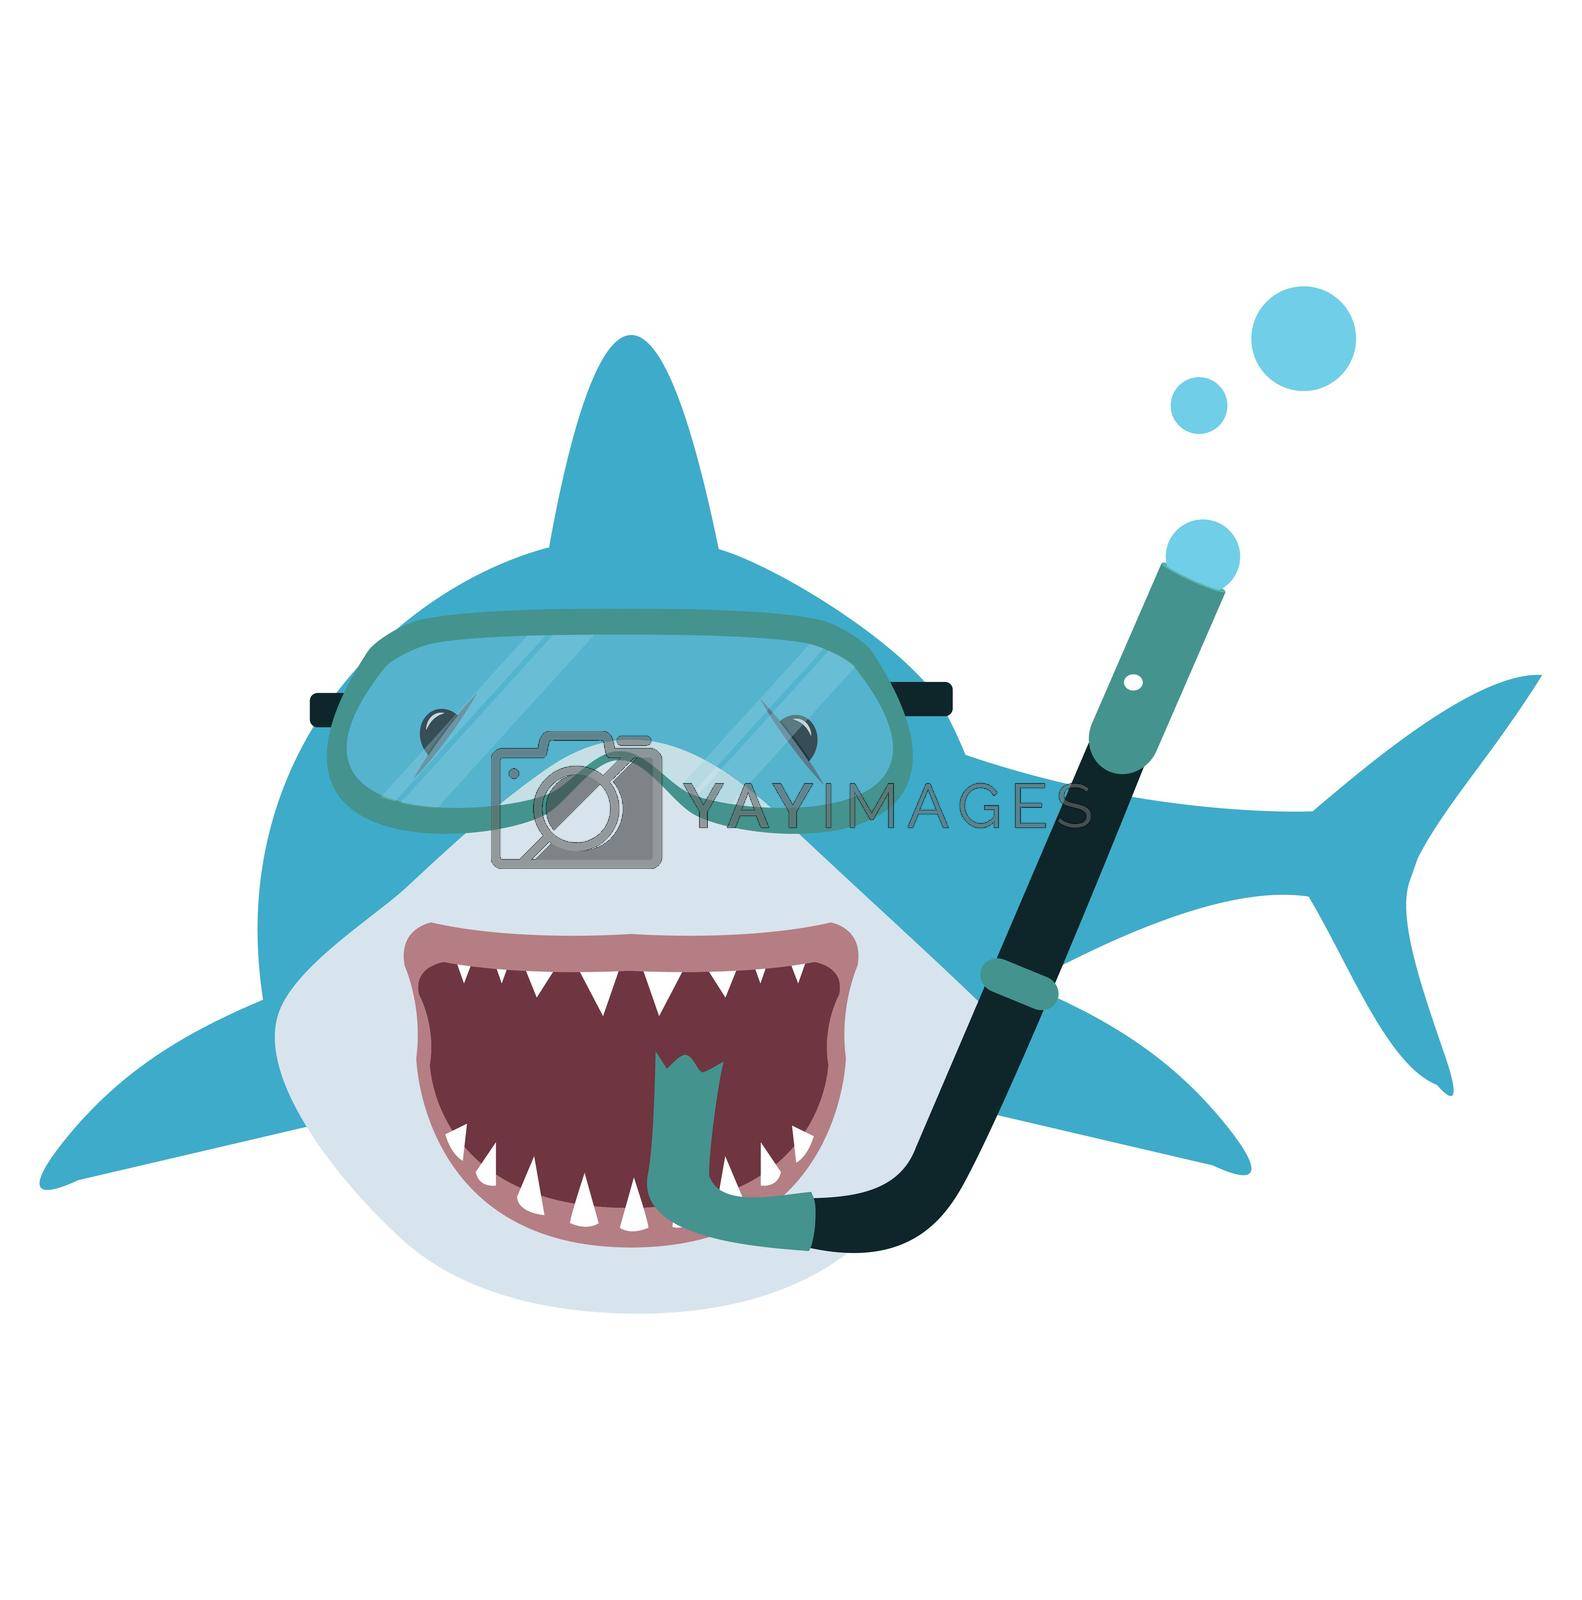 Royalty free image of Big shark with diving equipment  by focus_bell